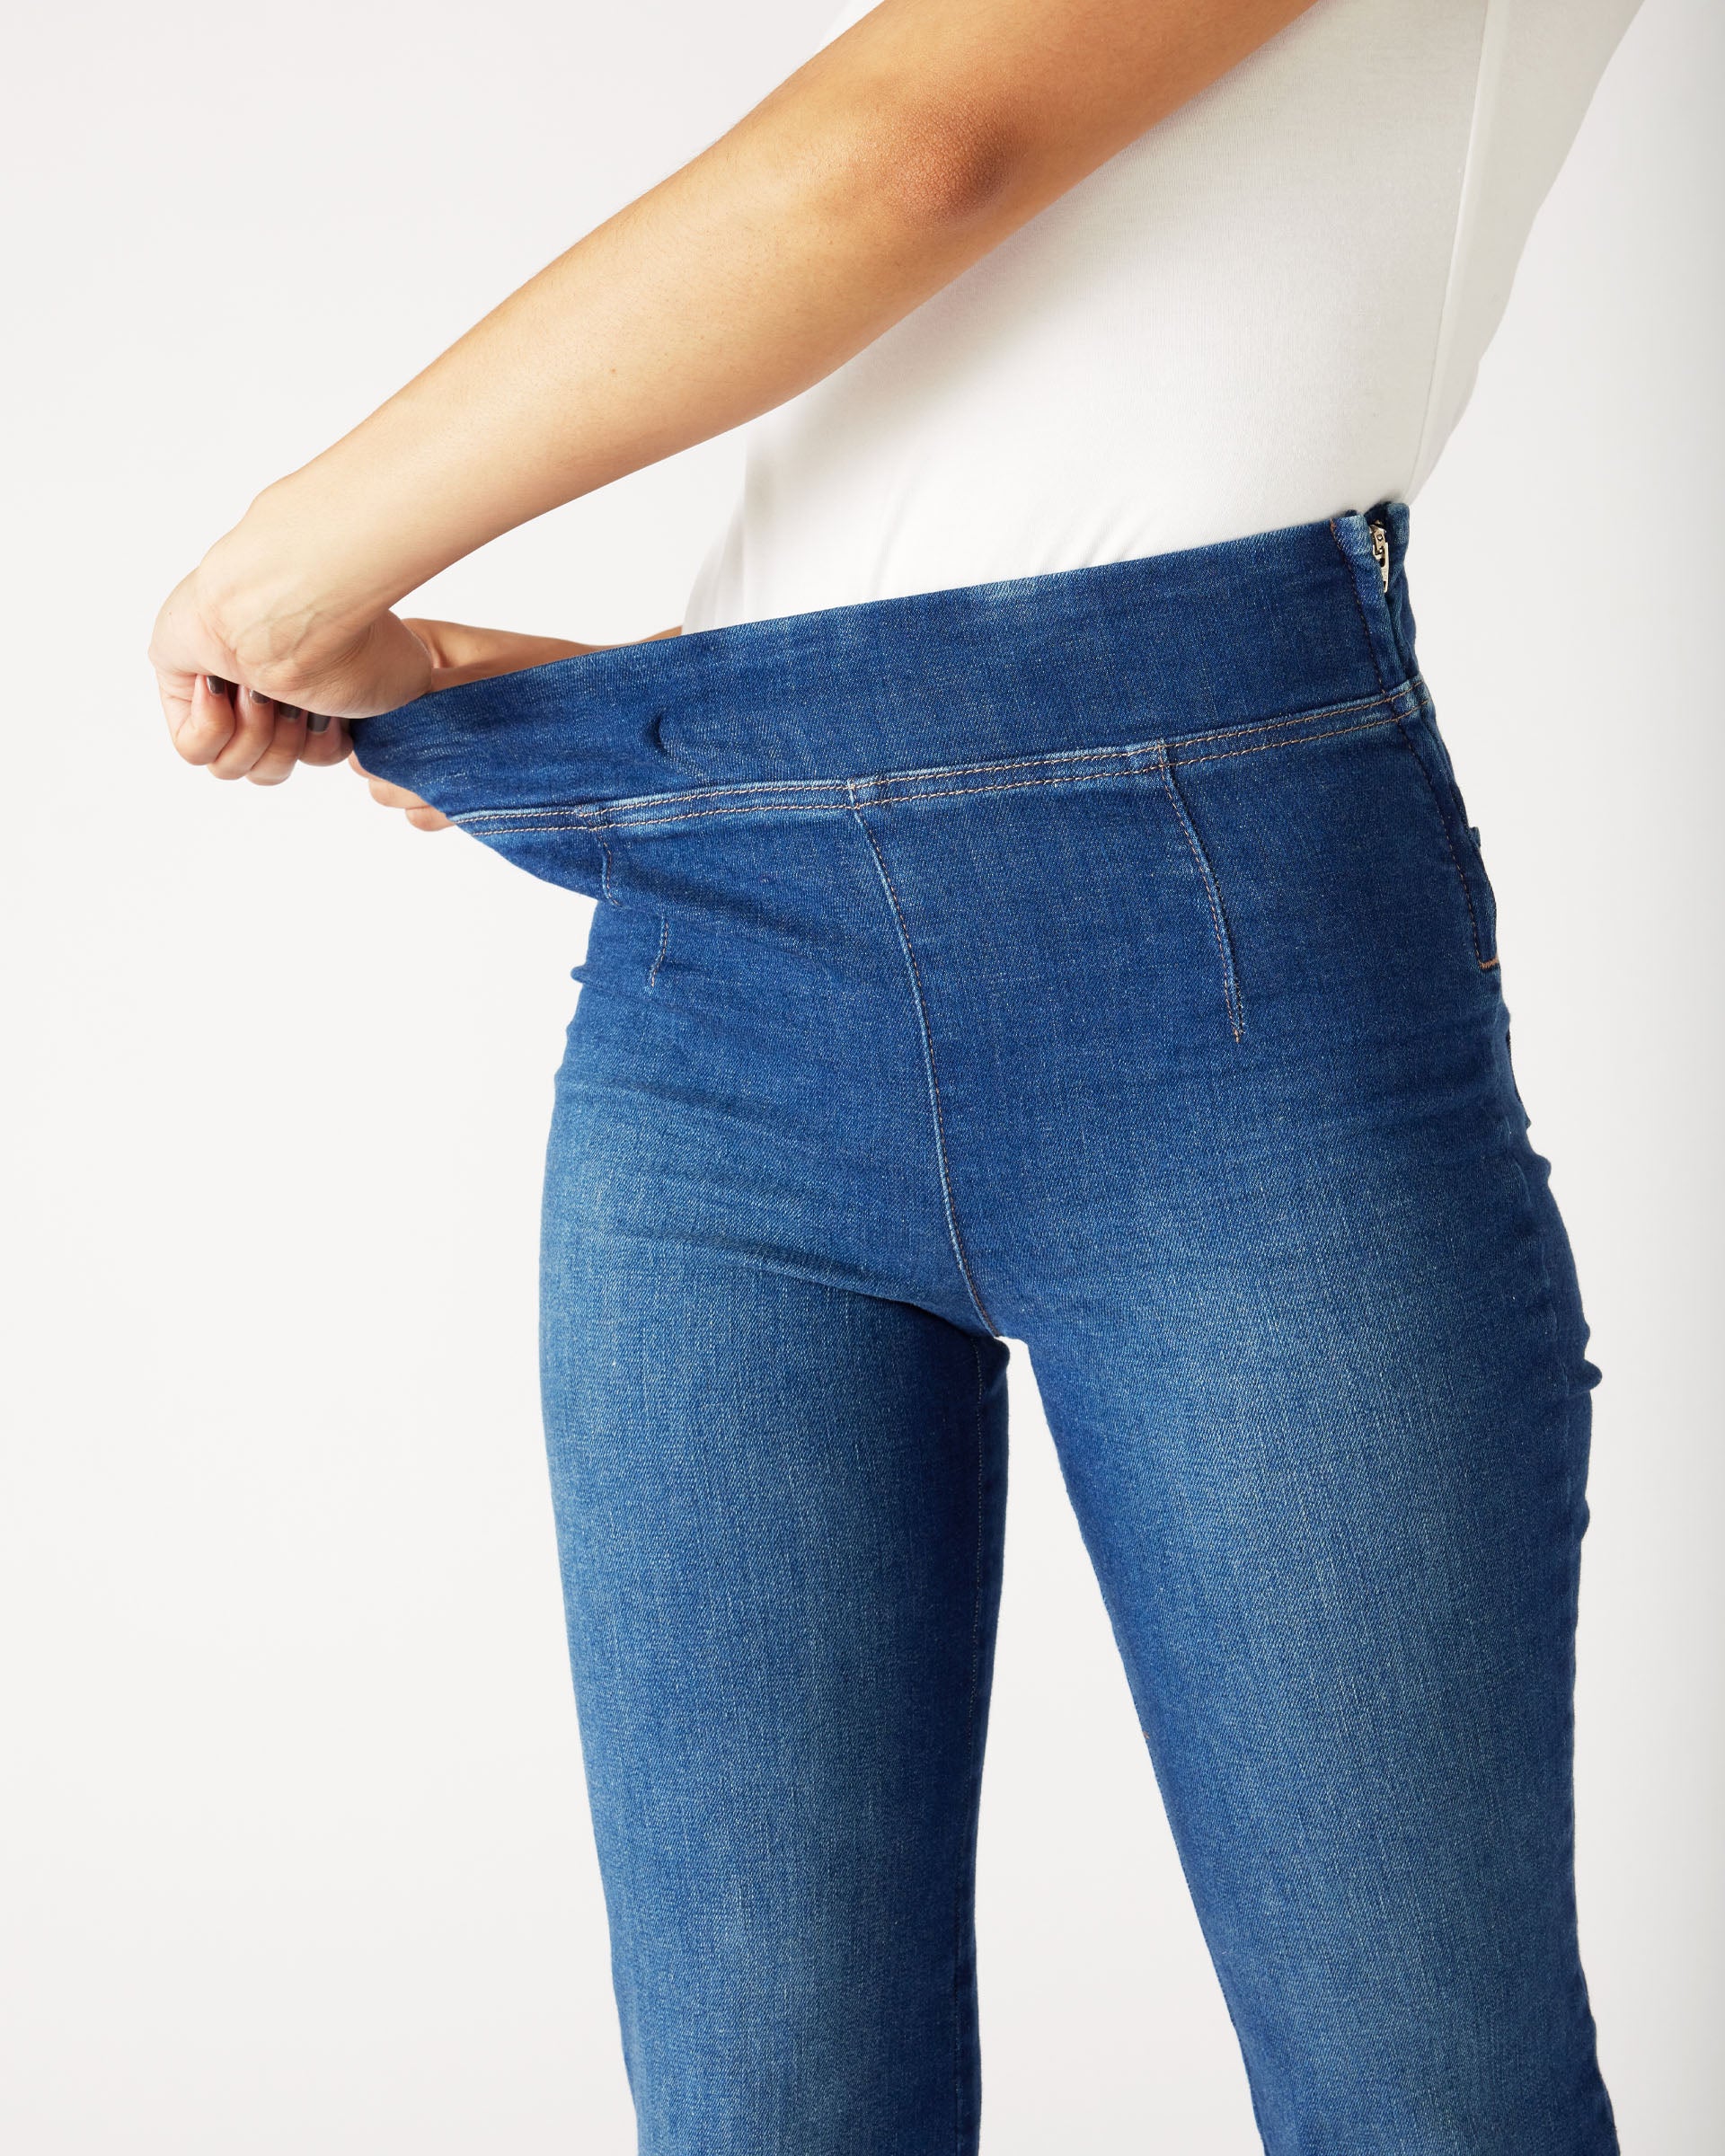 closeup of stretch waist on Mersea Nomad cadet blue denim full length boot-cut jeans against white background